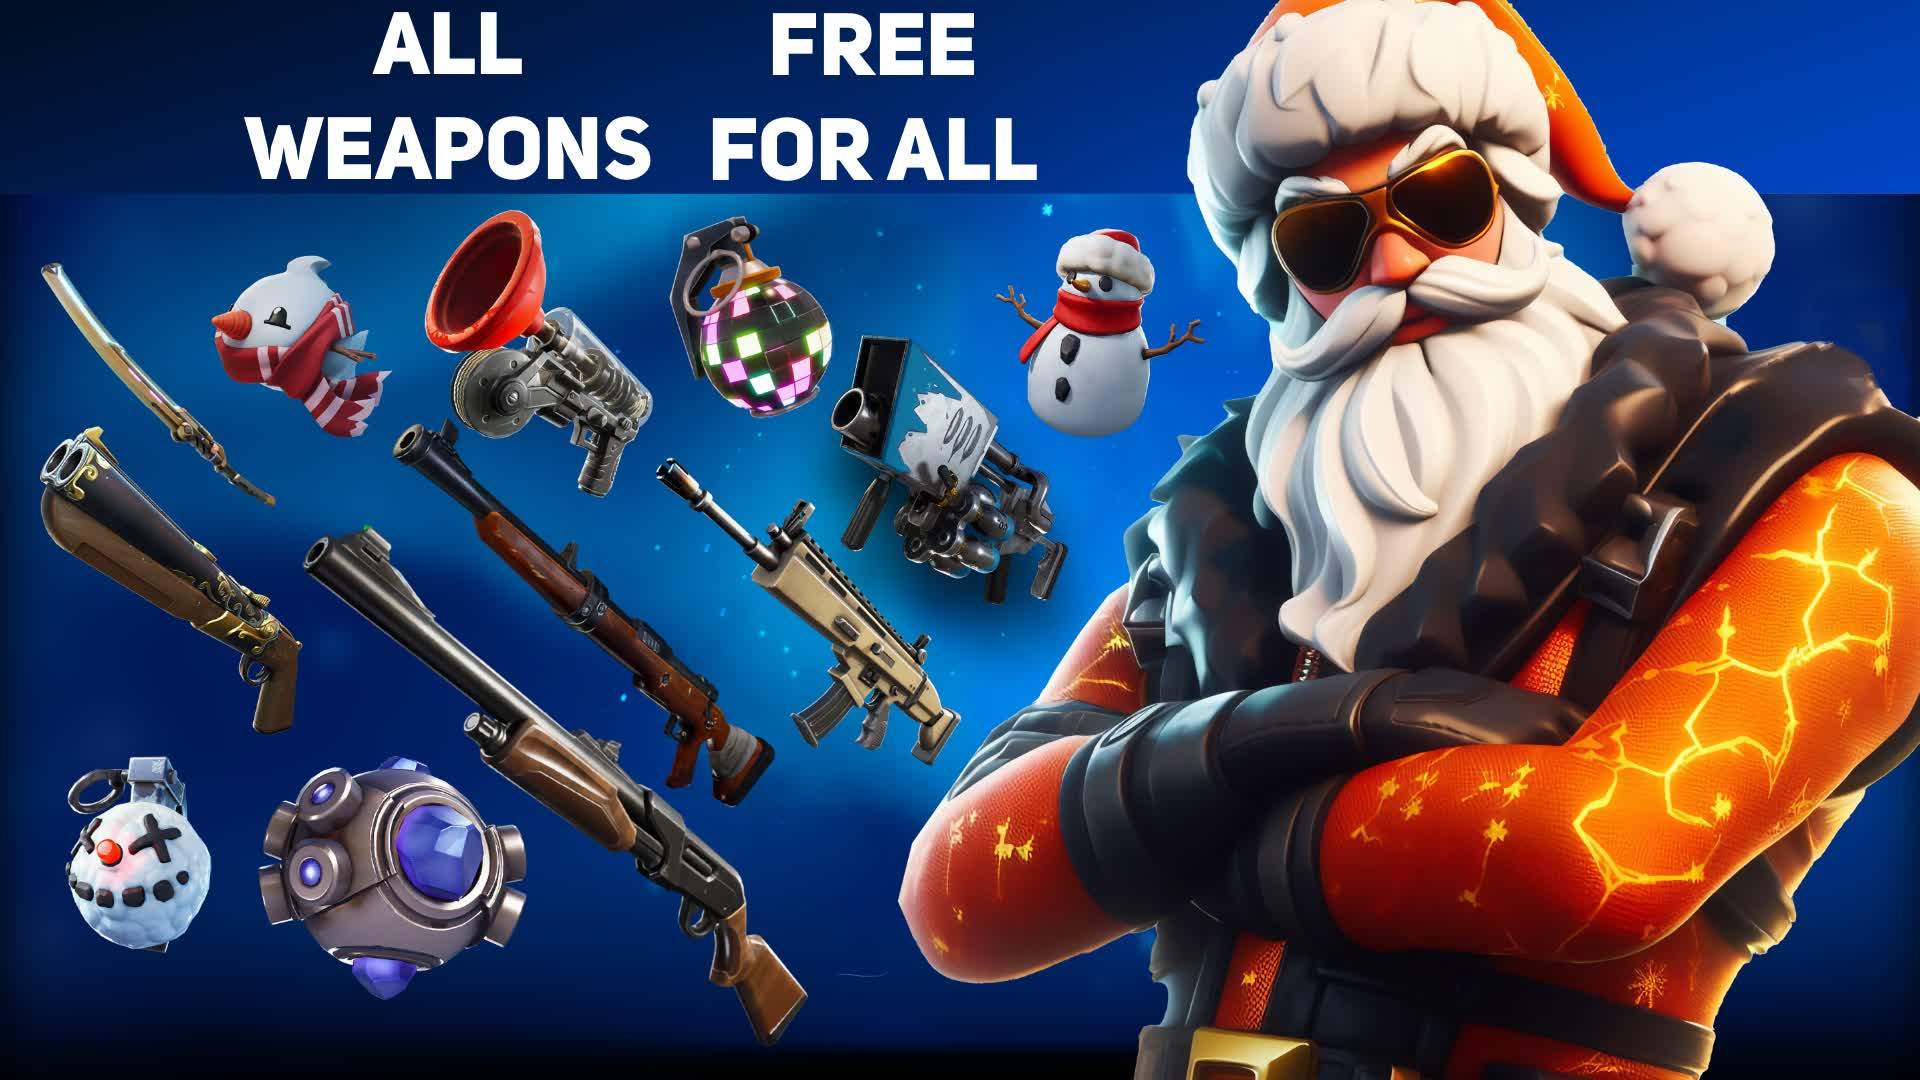 🎅 NORTH POLE 2 - FREE FOR ALL 🎄